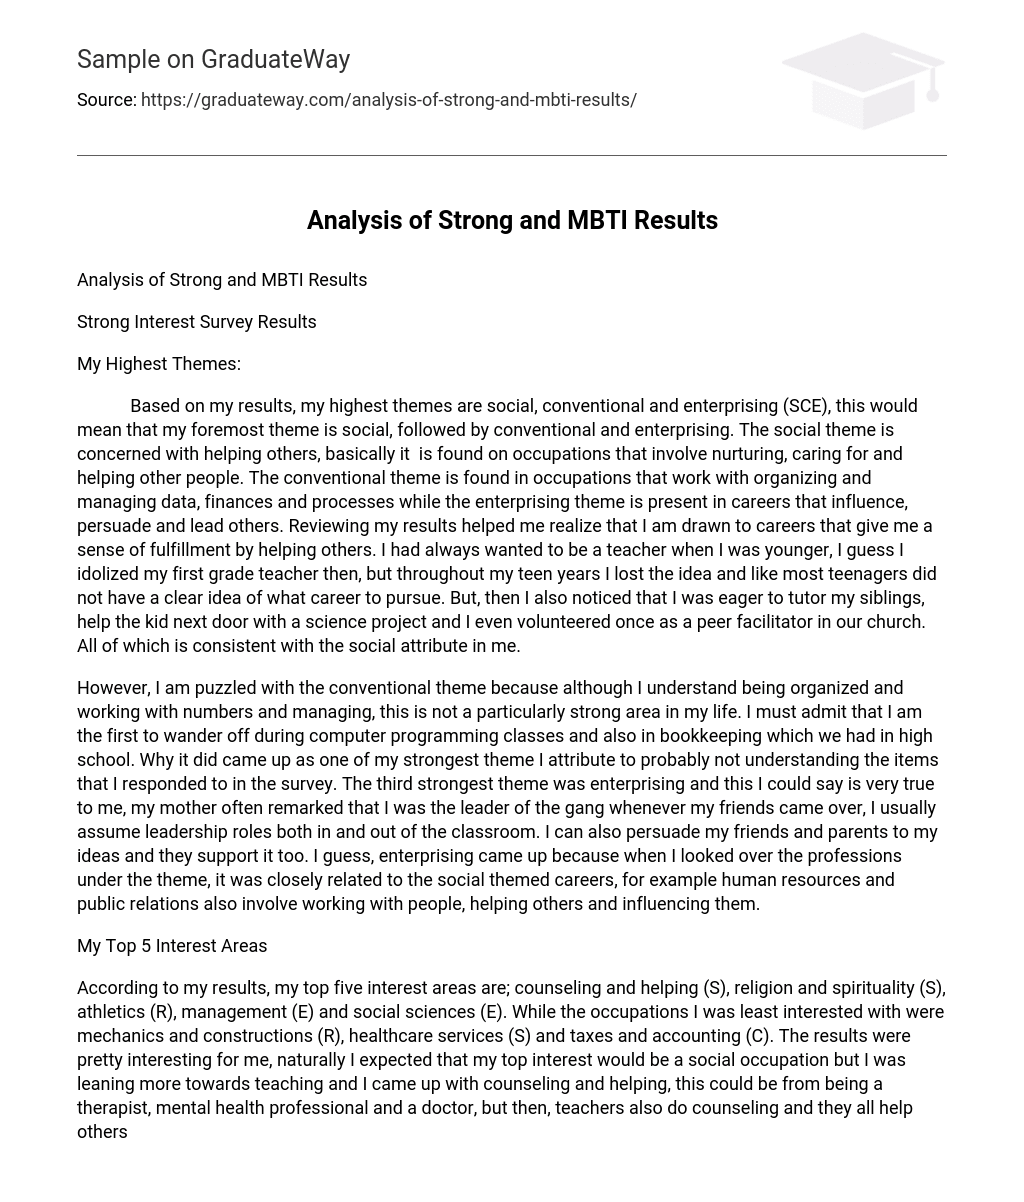 Analysis of Strong and MBTI Results